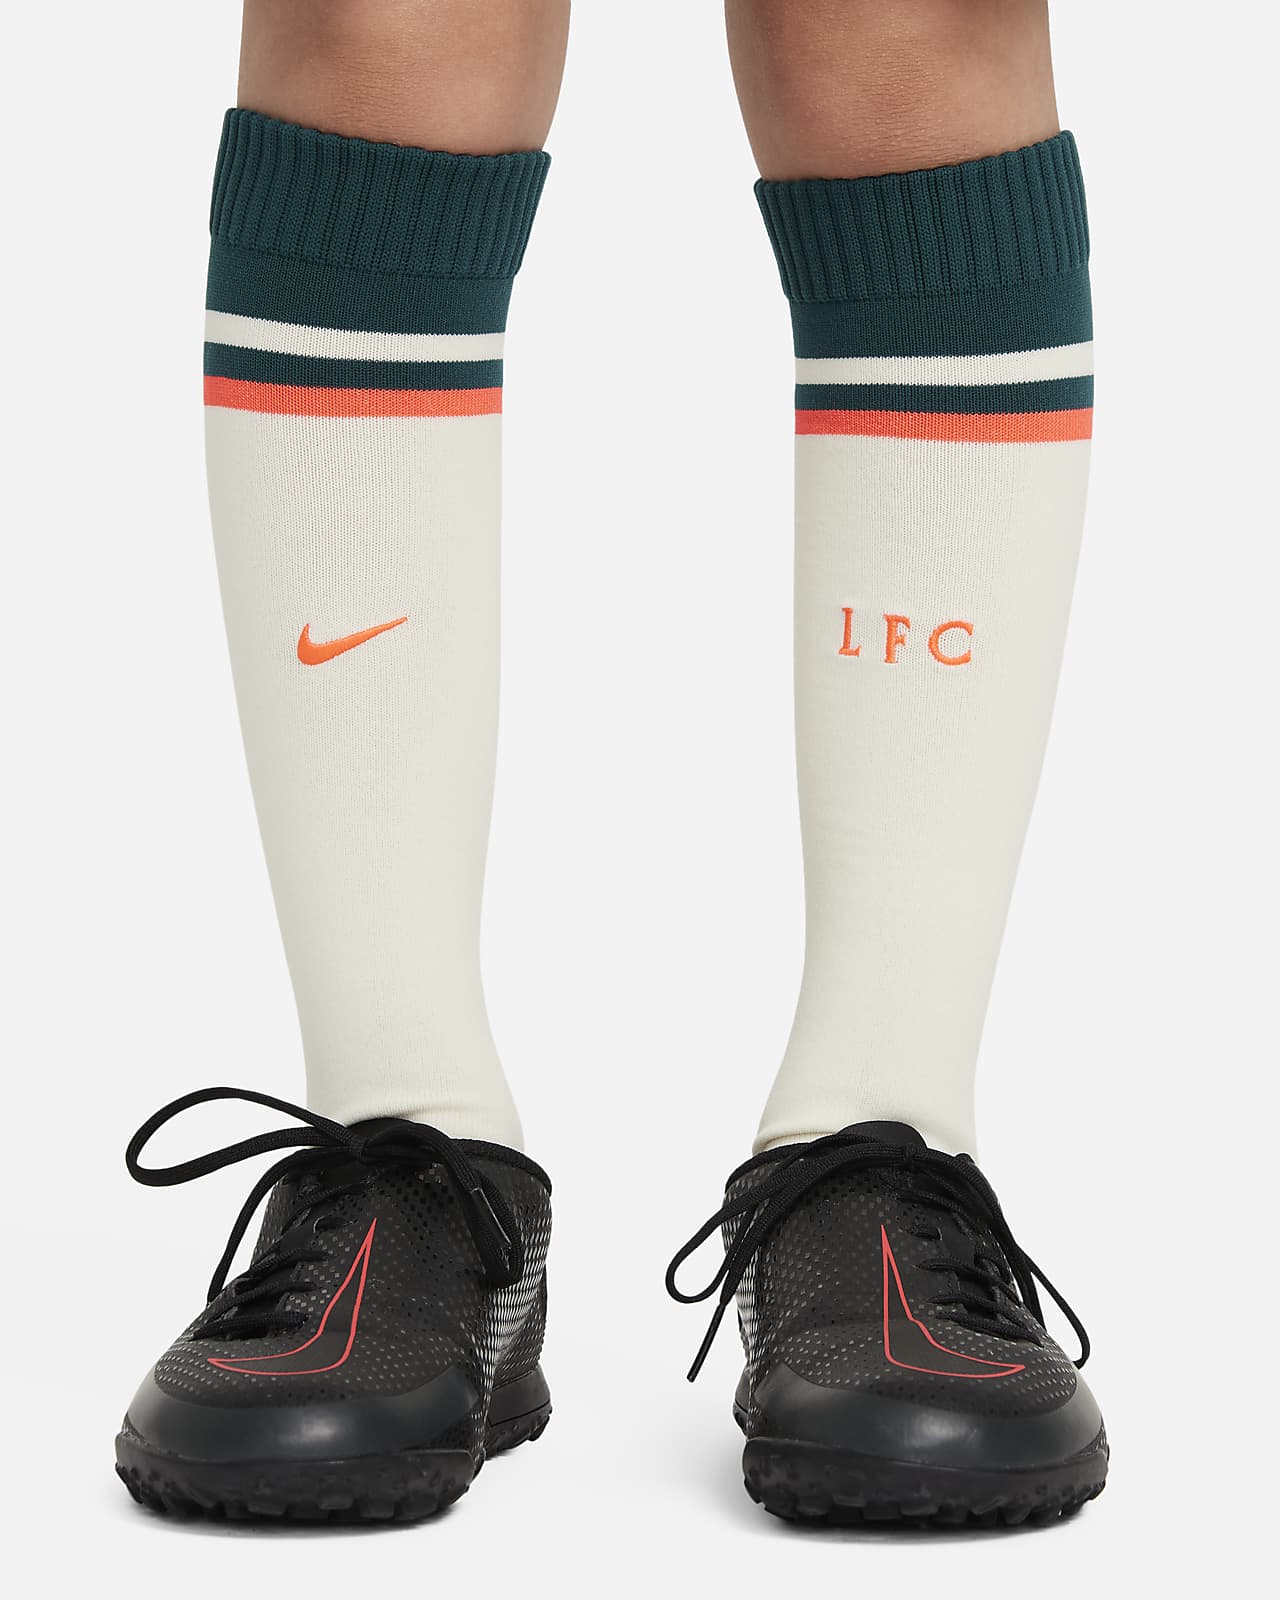 New LFC Away Kit 2021/22 released as Nike apply retro touch